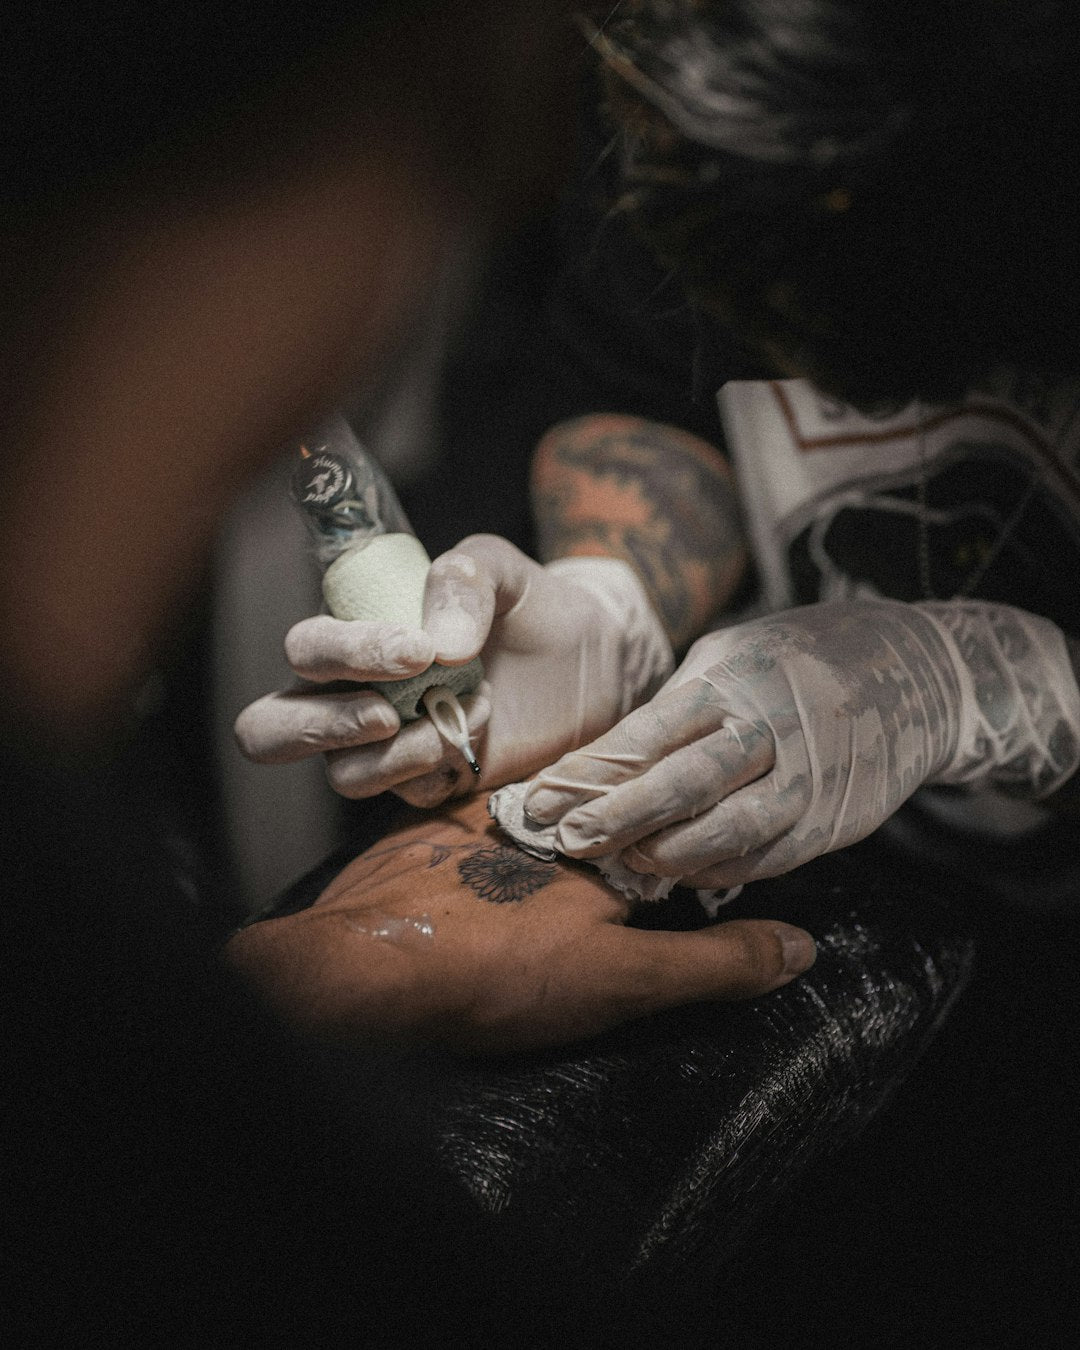 Tattoo Care: How to Maintain Vibrant Color and Long-lasting Ink